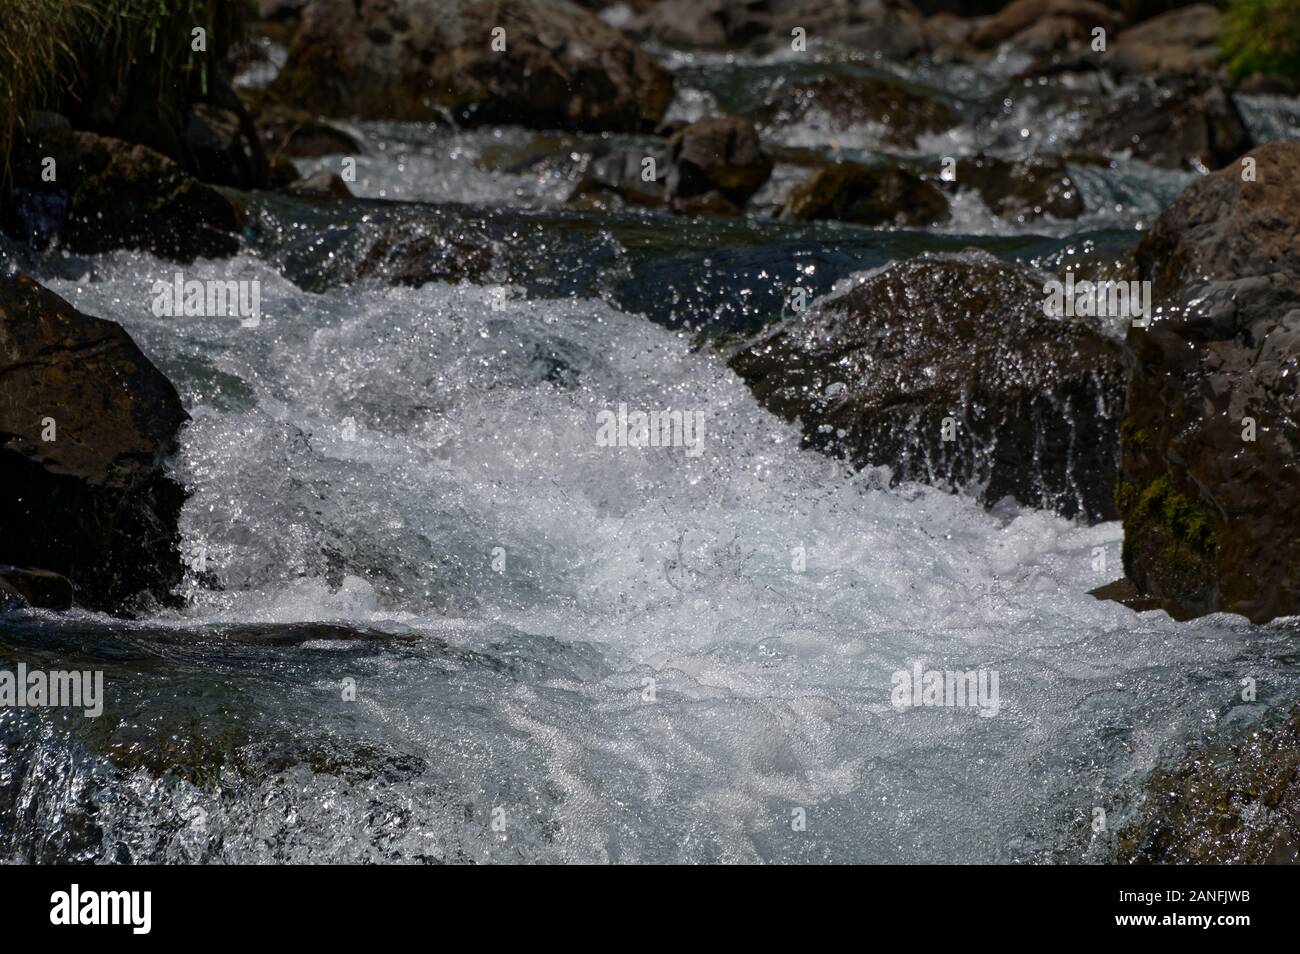 A river bed has frothy, white water from the flow of the water Stock Photo